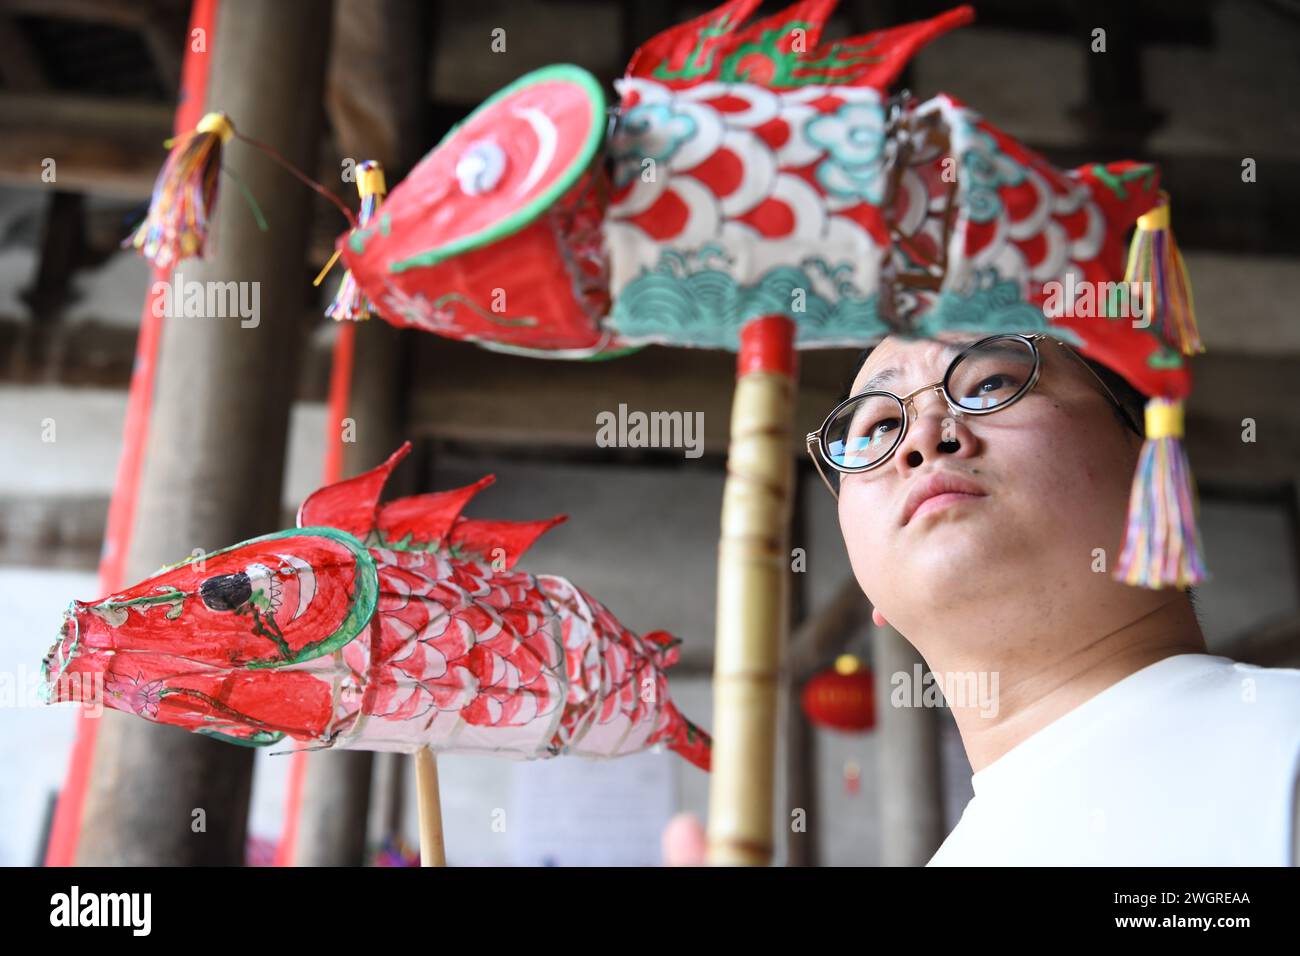 (240206) -- SHEXIAN, Feb. 6, 2024 (Xinhua) -- Wang Yufang shows finished fish-shaped lanterns in Zhanqi Village of Shexian County, Huangshan City, east China's Anhui Province, Sept. 6, 2023. The parade with fish-shaped lanterns is an important folk cultural activity in Shexian County. Every year, in the first month of Chinese lunar calendar, it attracts tourists from all over the country. Born in 1996, Wang Yufang is an inheritor of fish-shaped lantern making skills, an intangible cultural heritage. Wang started to learn the skills from local villagers when he was 12 years old. Wang now Stock Photo